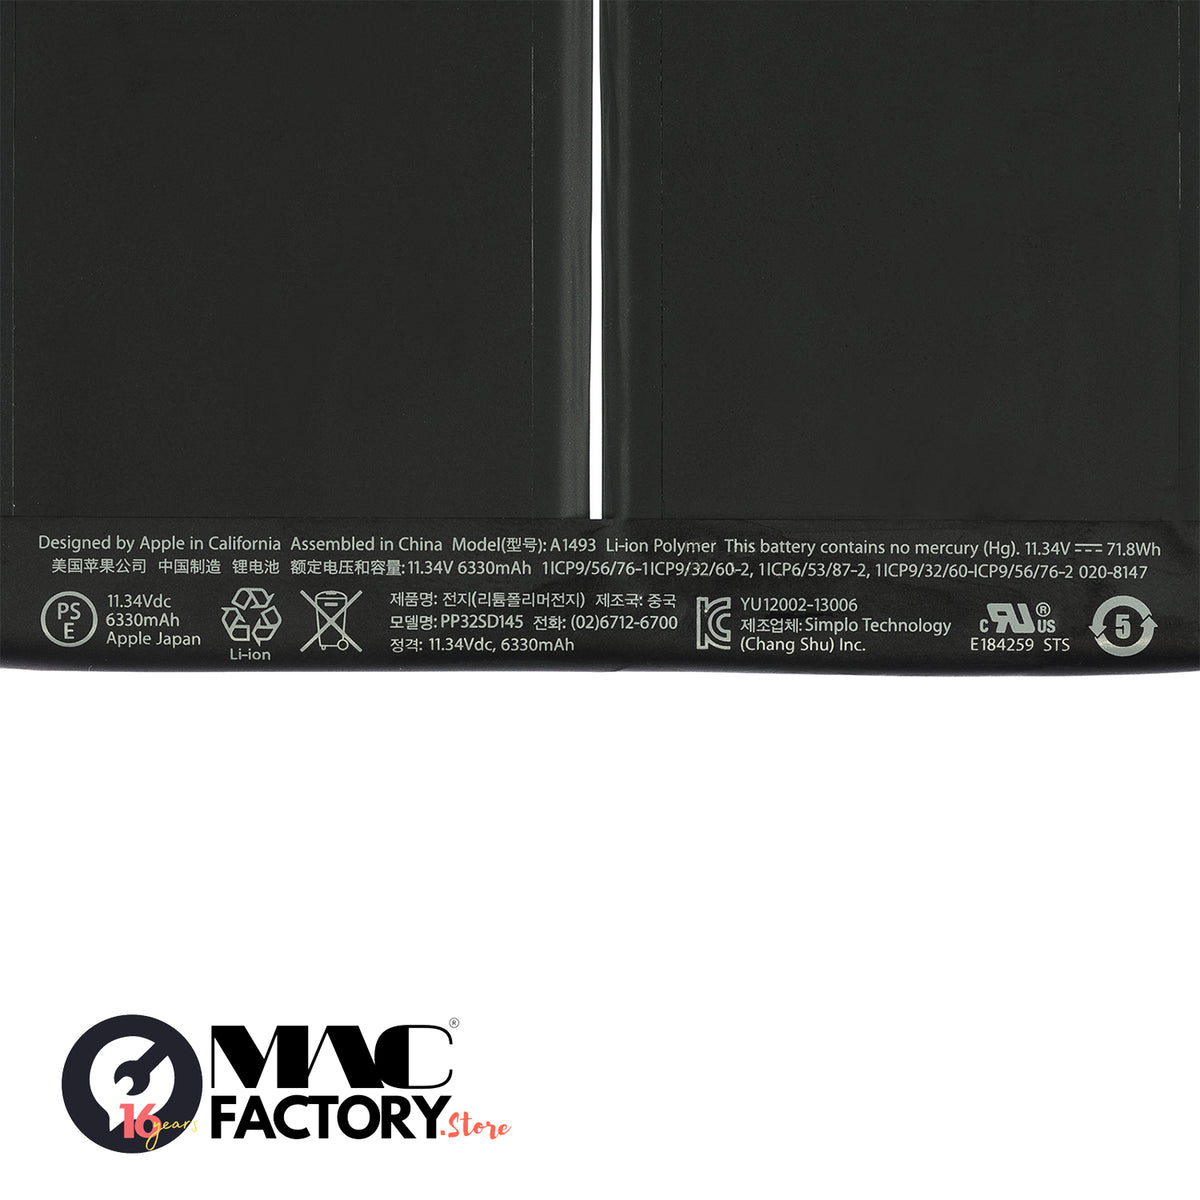 Avance A1493 11.34V-6330MAH Battery for Apple MacBook Pro Retina 13" A1502 LATE 2013 MID 2014